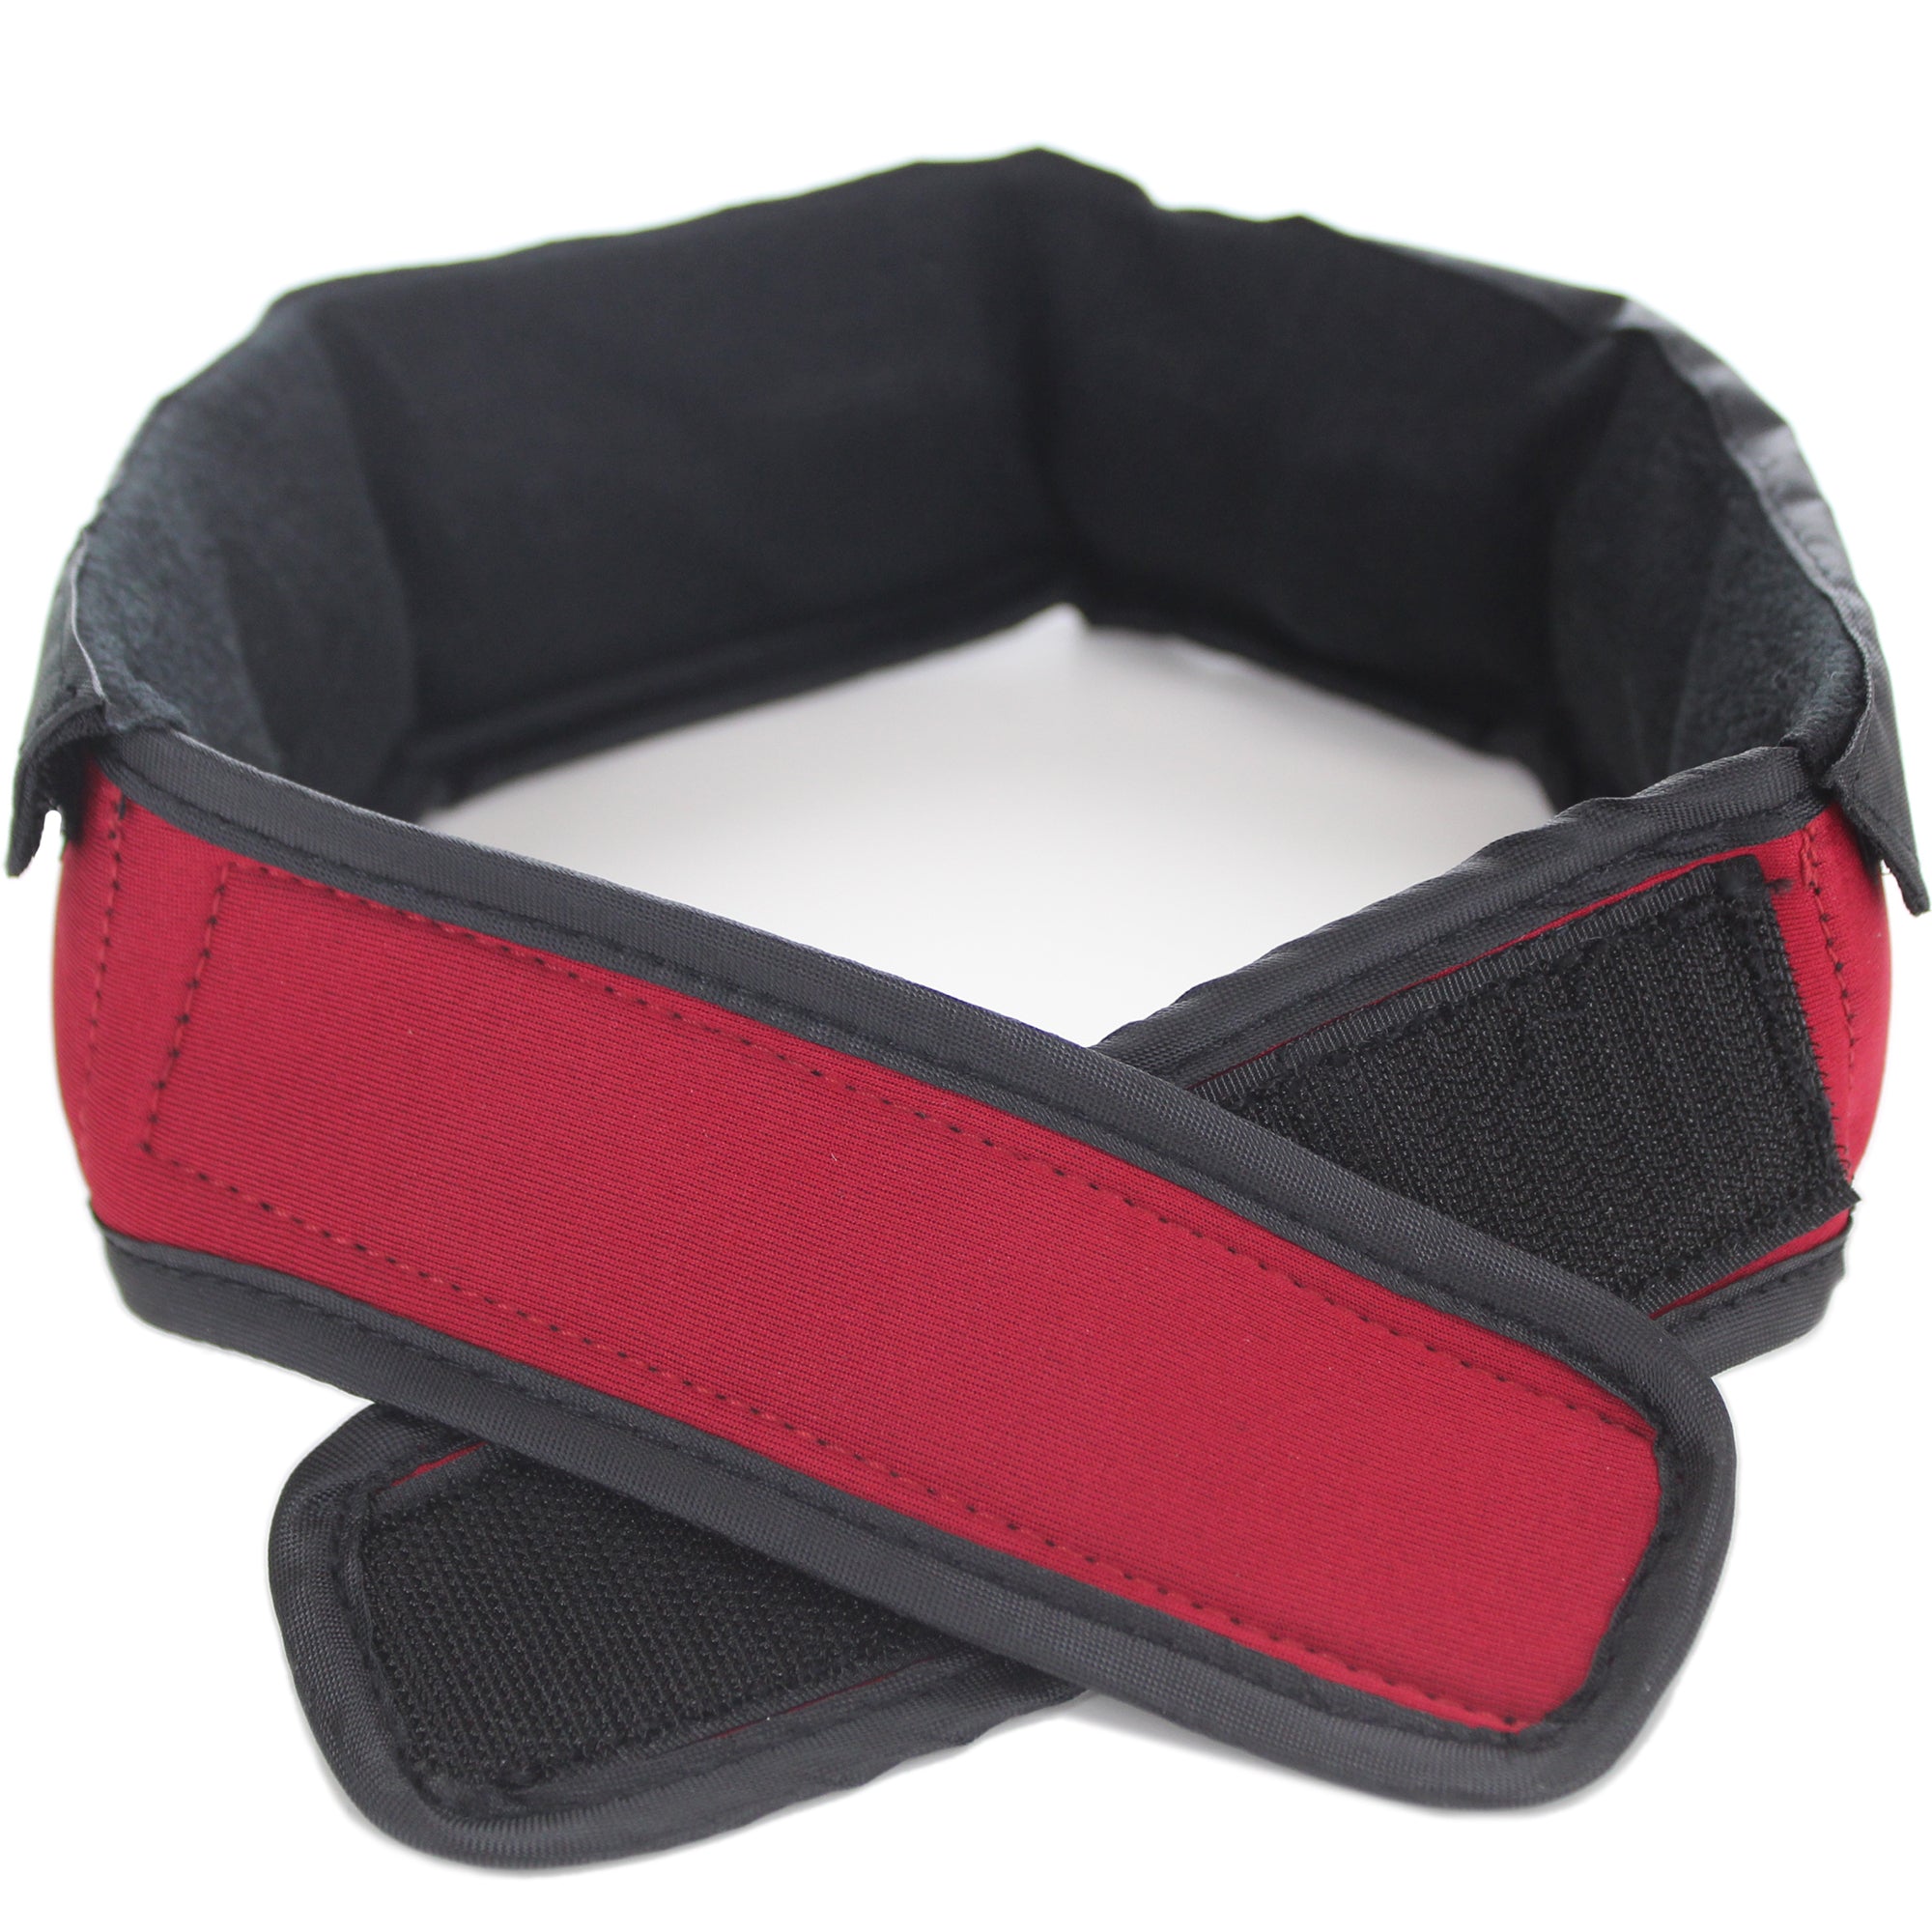 FlexiFreeze Cooling Collar, red